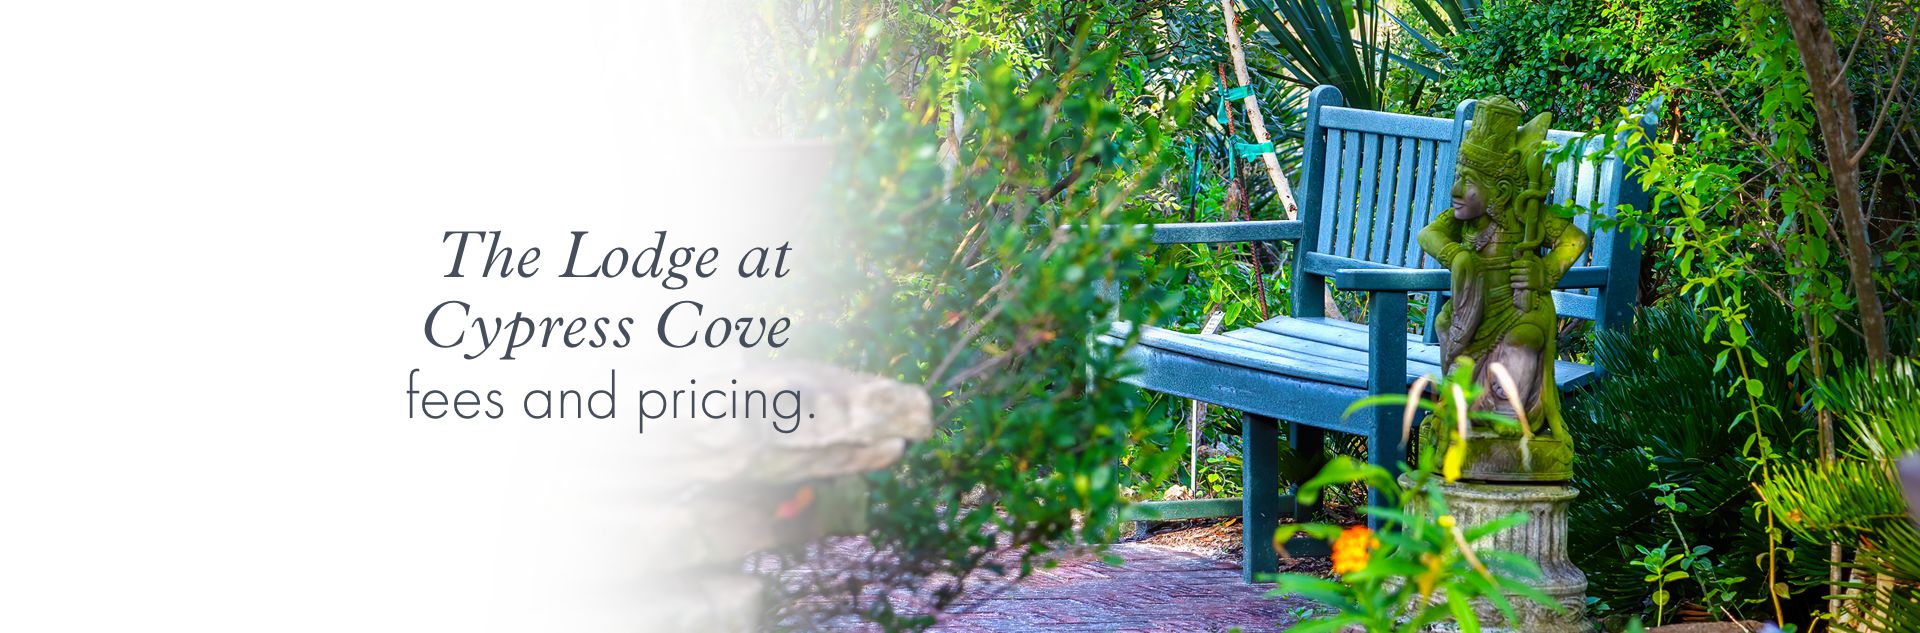 The Lodge at Cypress Cove  fees and pricing.